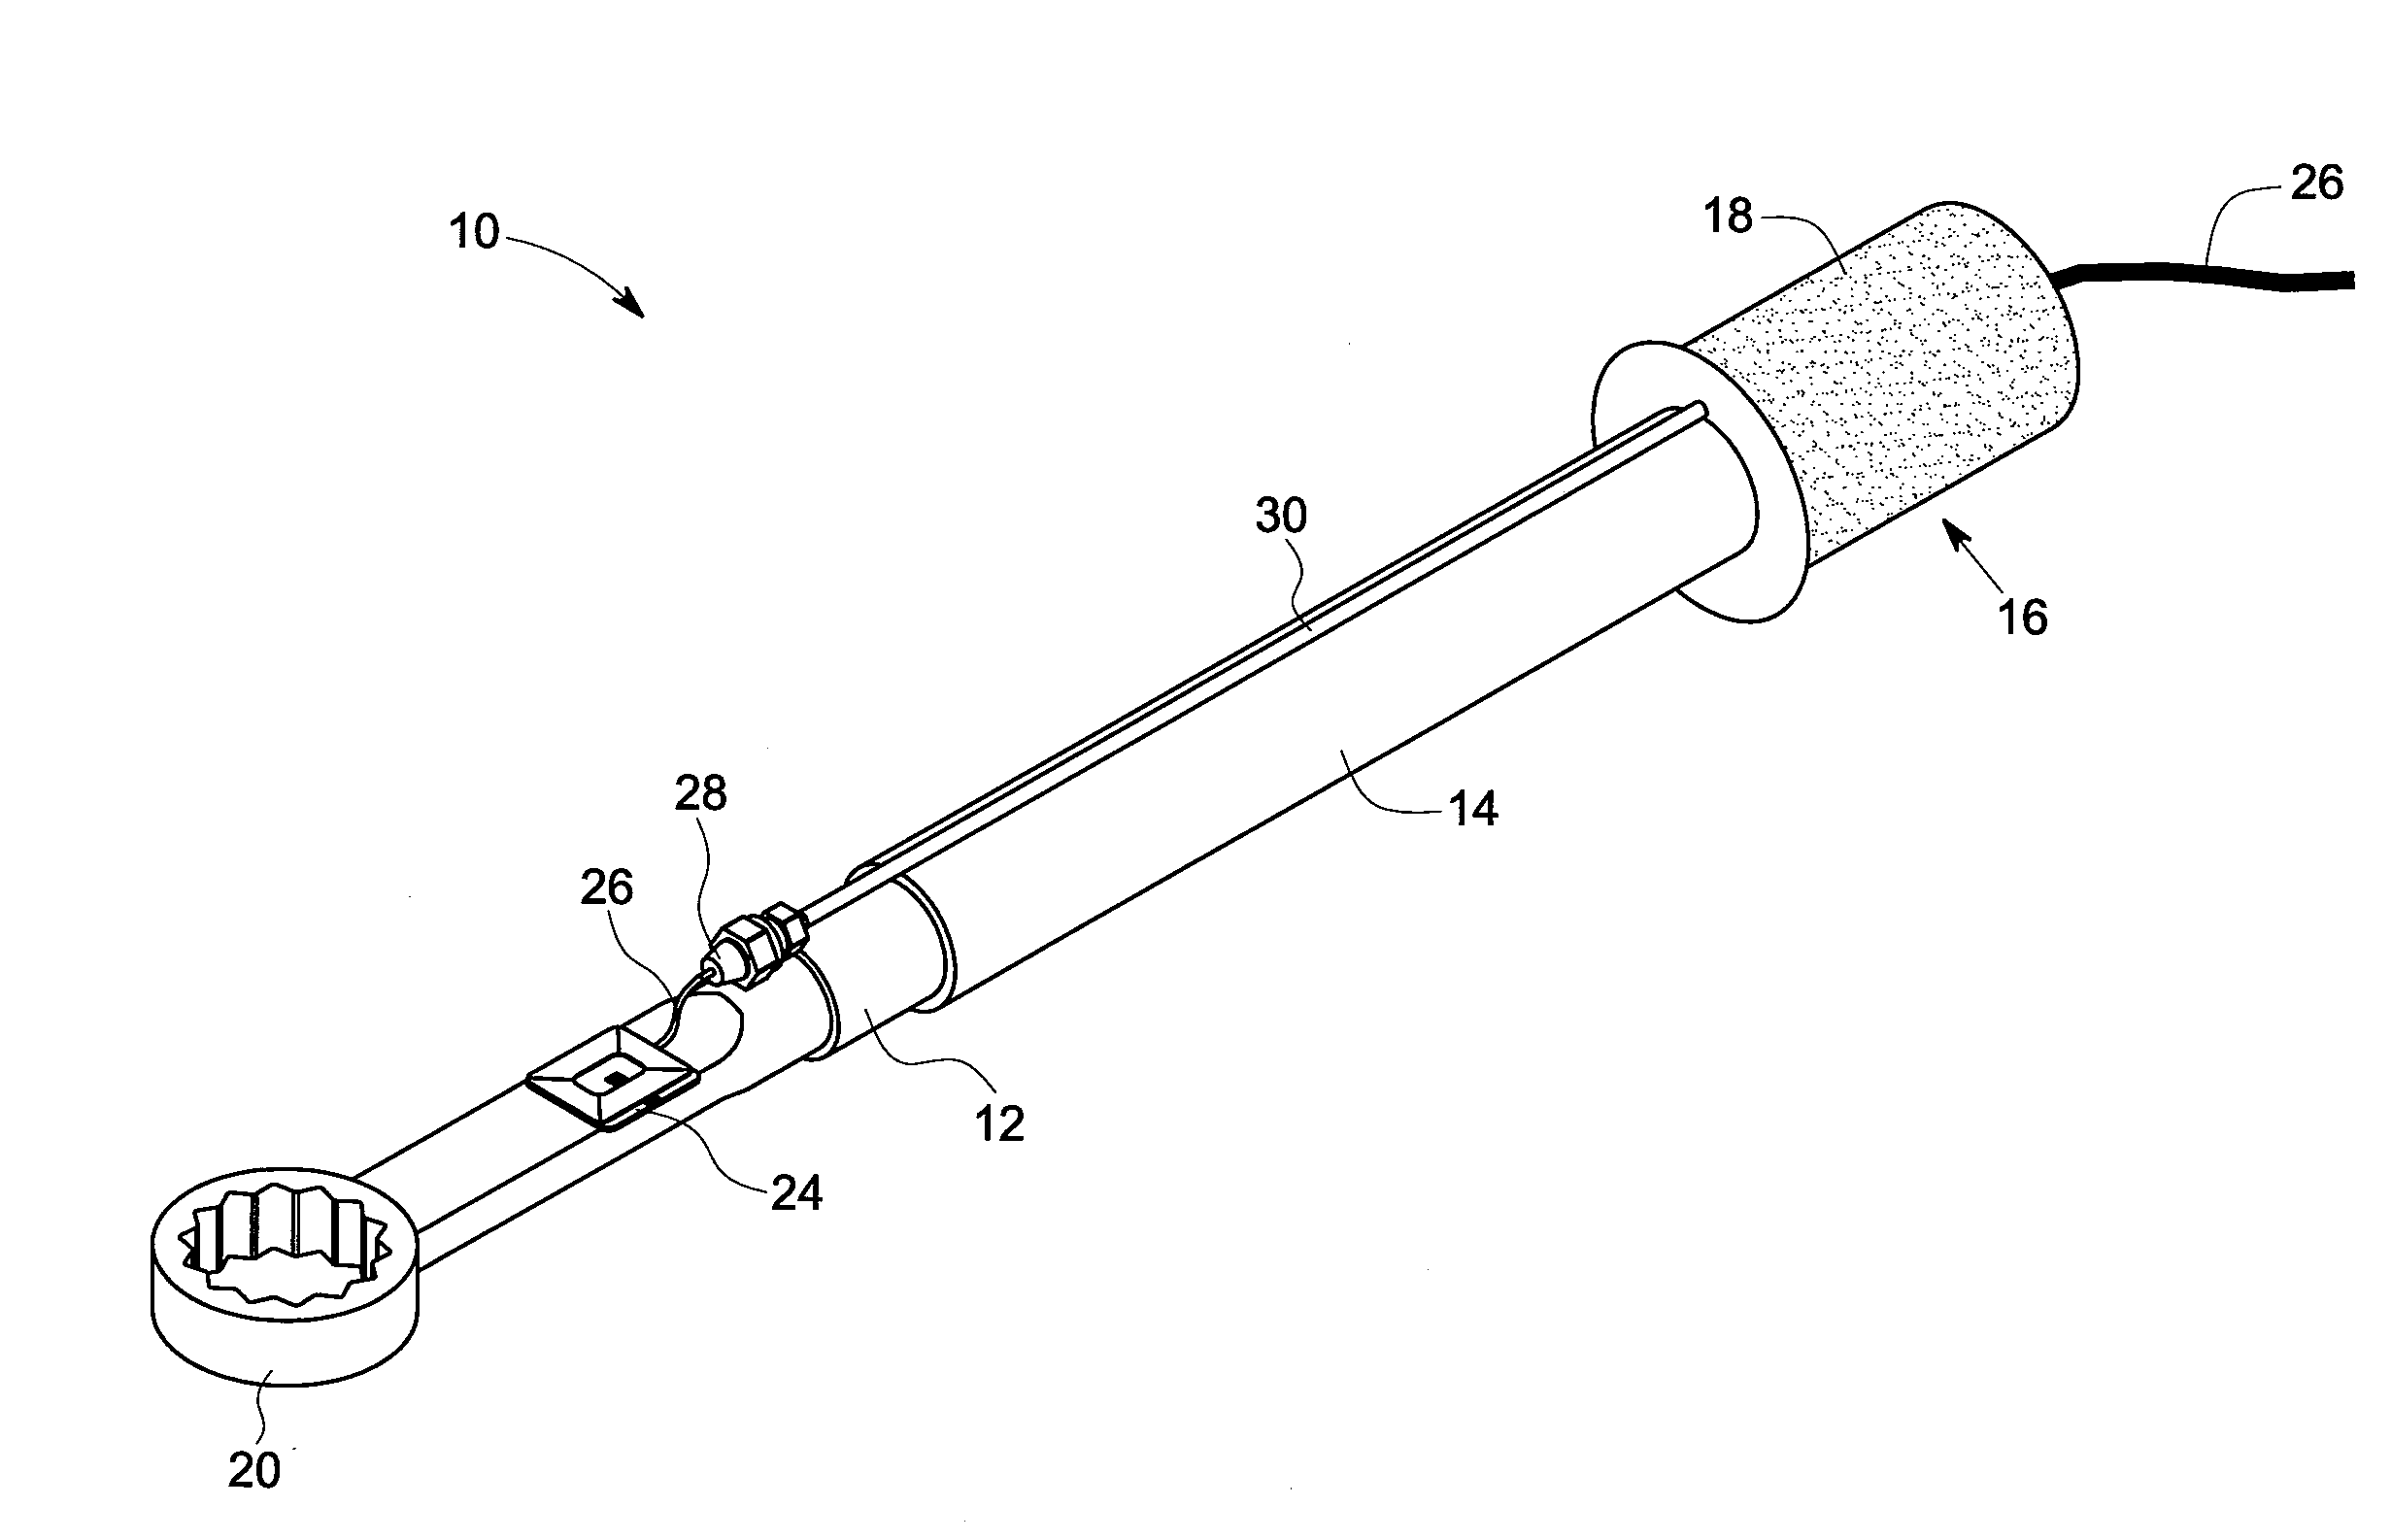 Radio frequency identification enabled wrench system and a method of operating the same